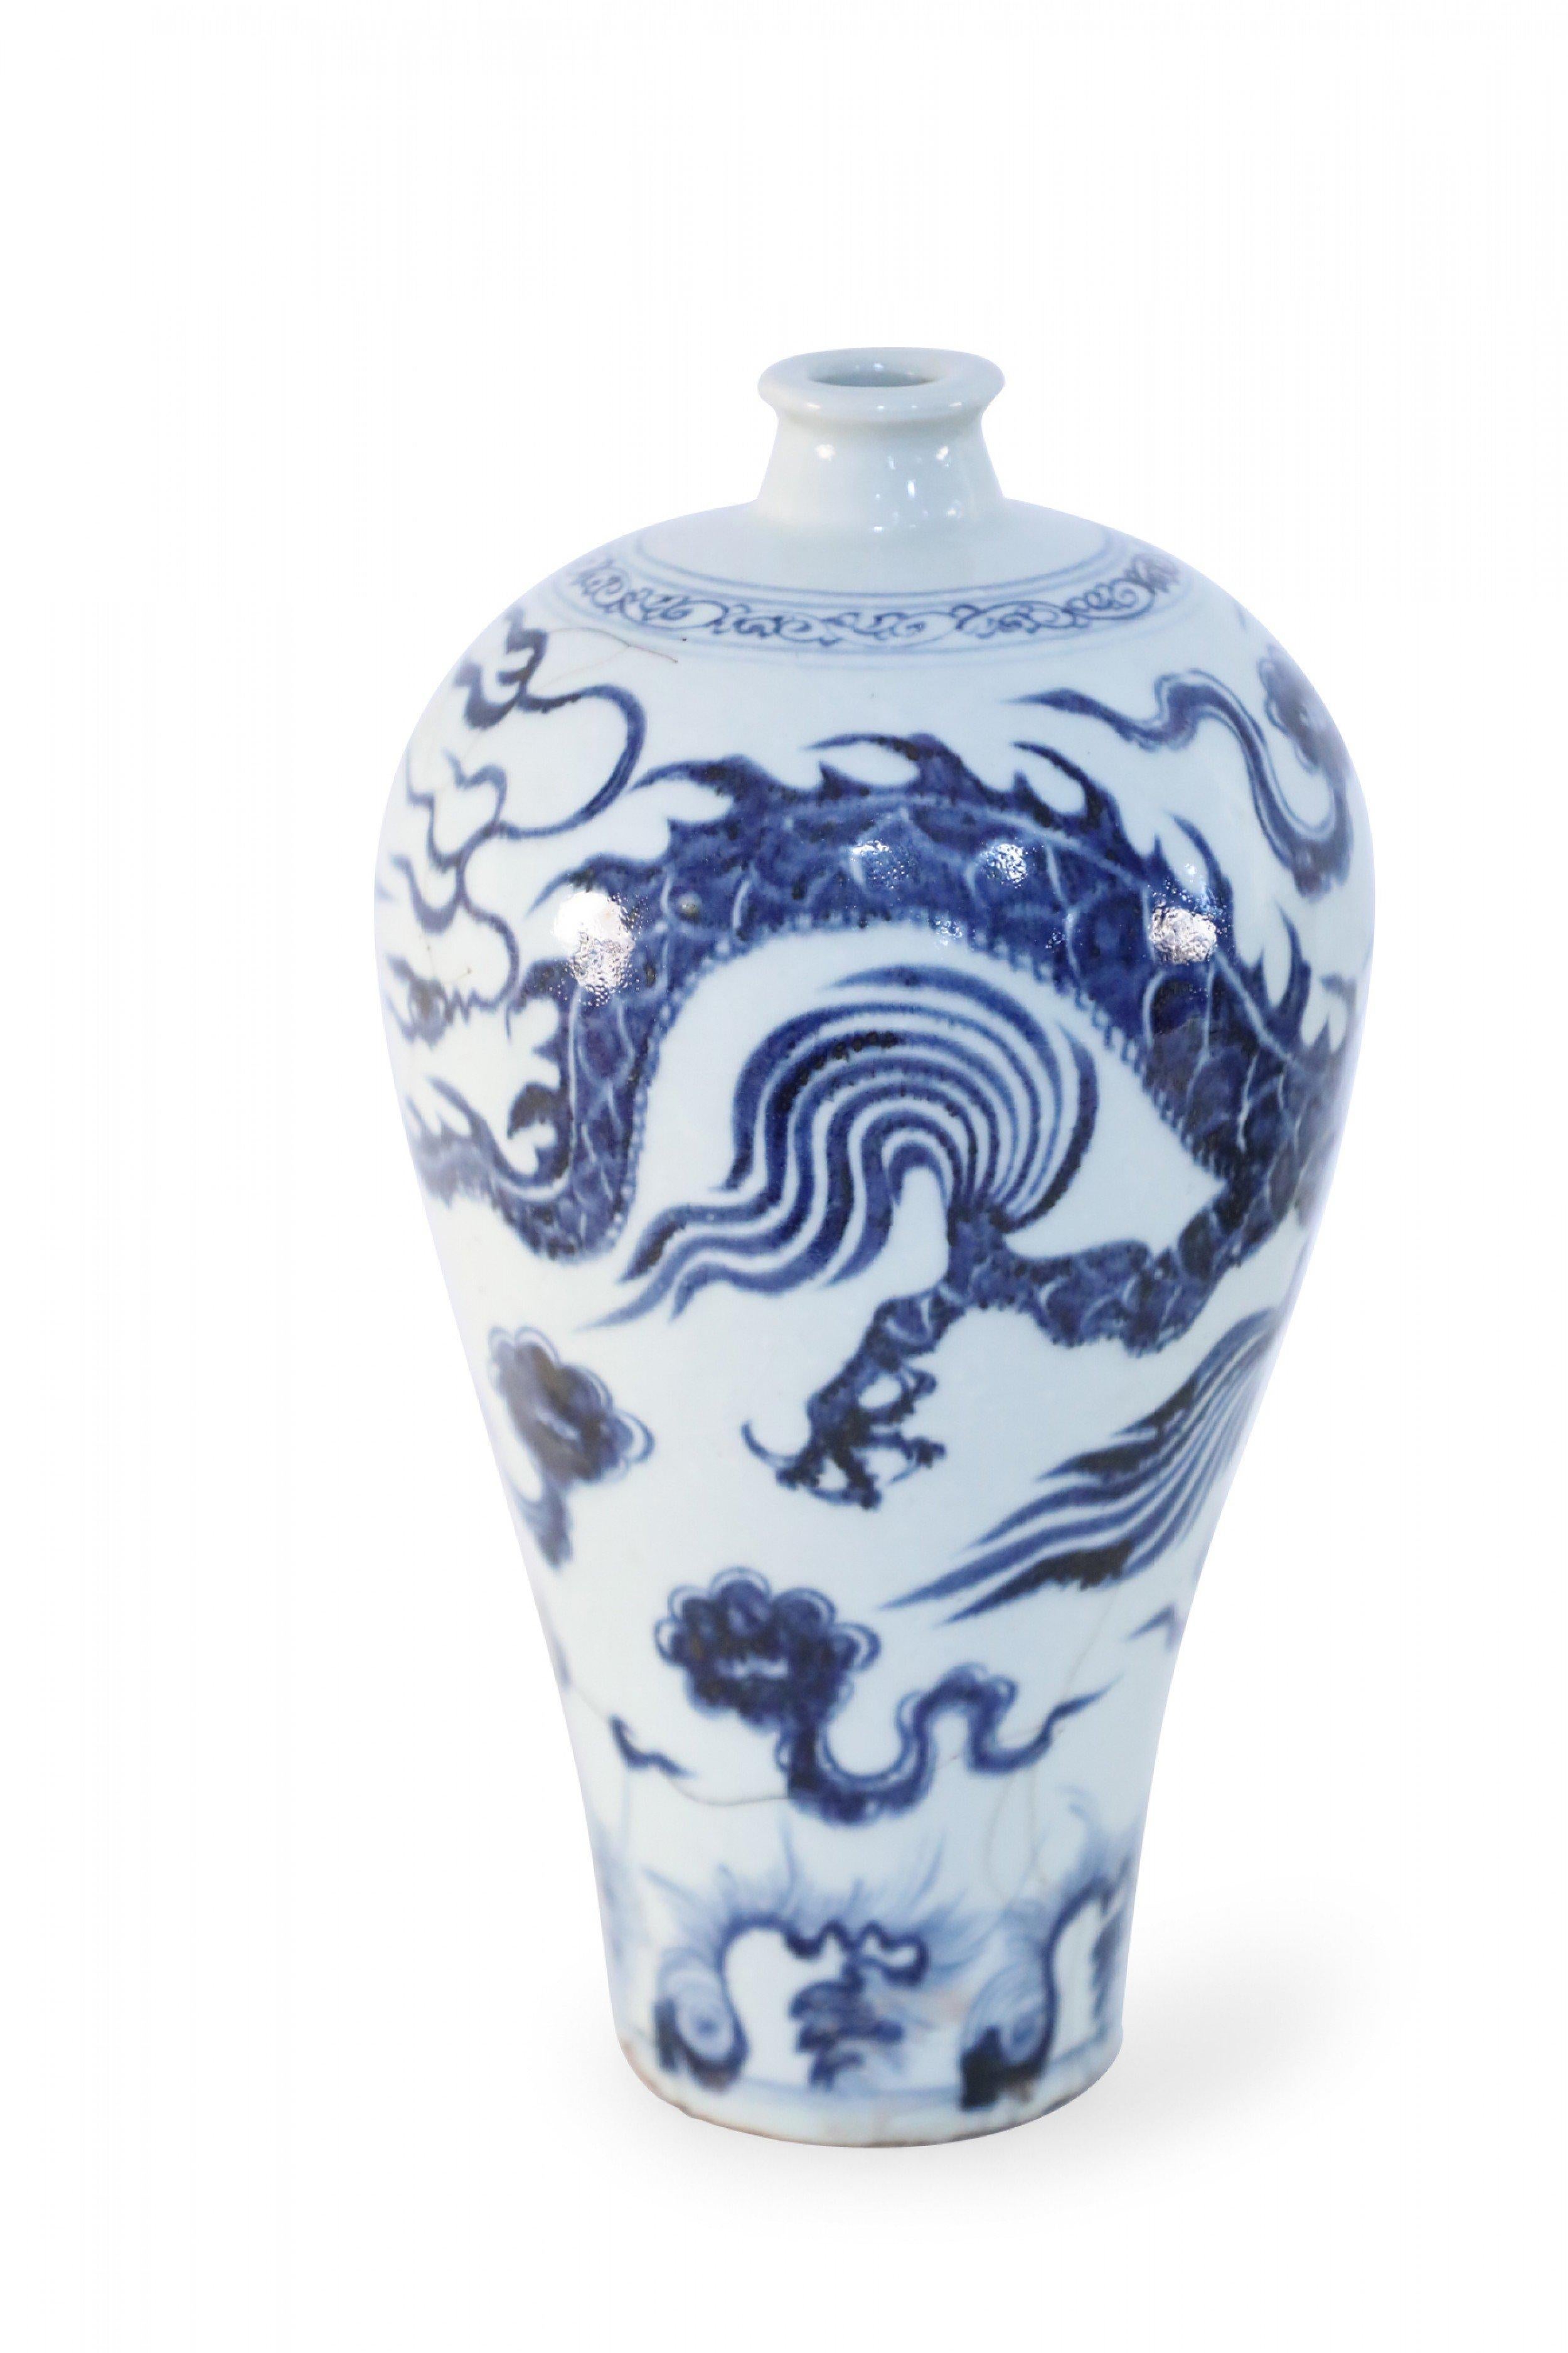 Antique Chinese (Late 17th century-style) white porcelain Meiping vase decorated in a dynamic blue dragon motif.
    